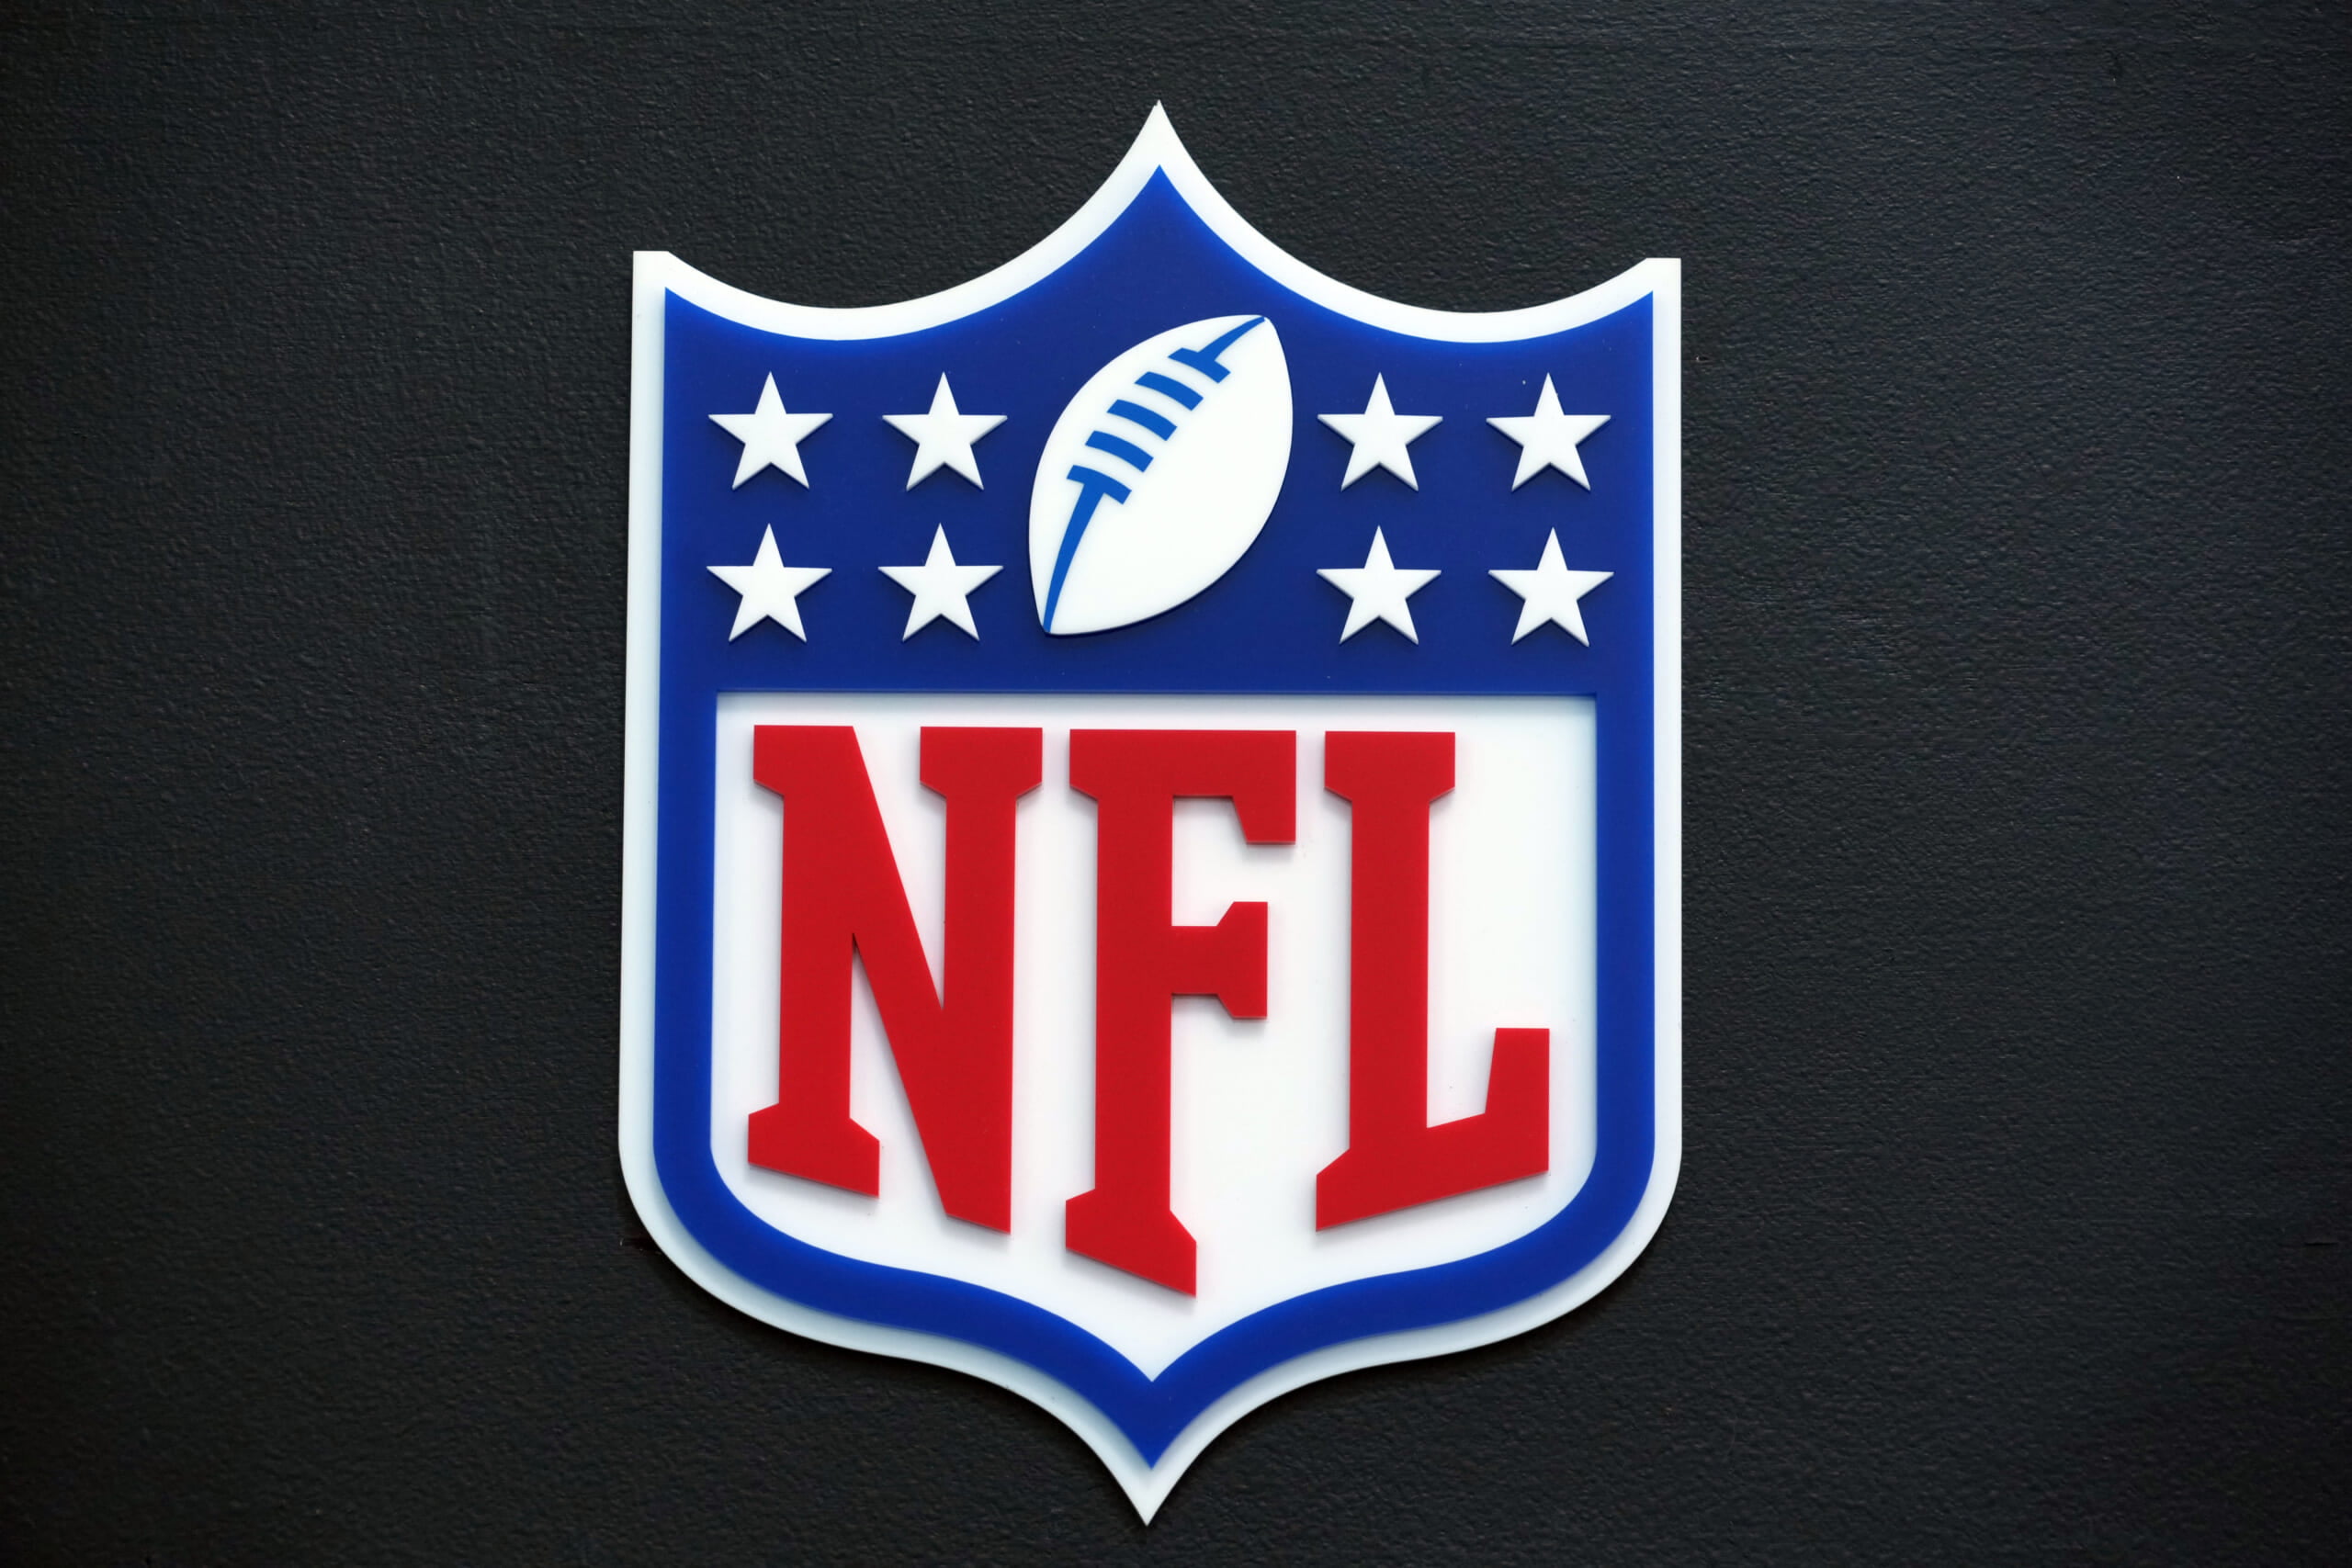 nfl football package without directv